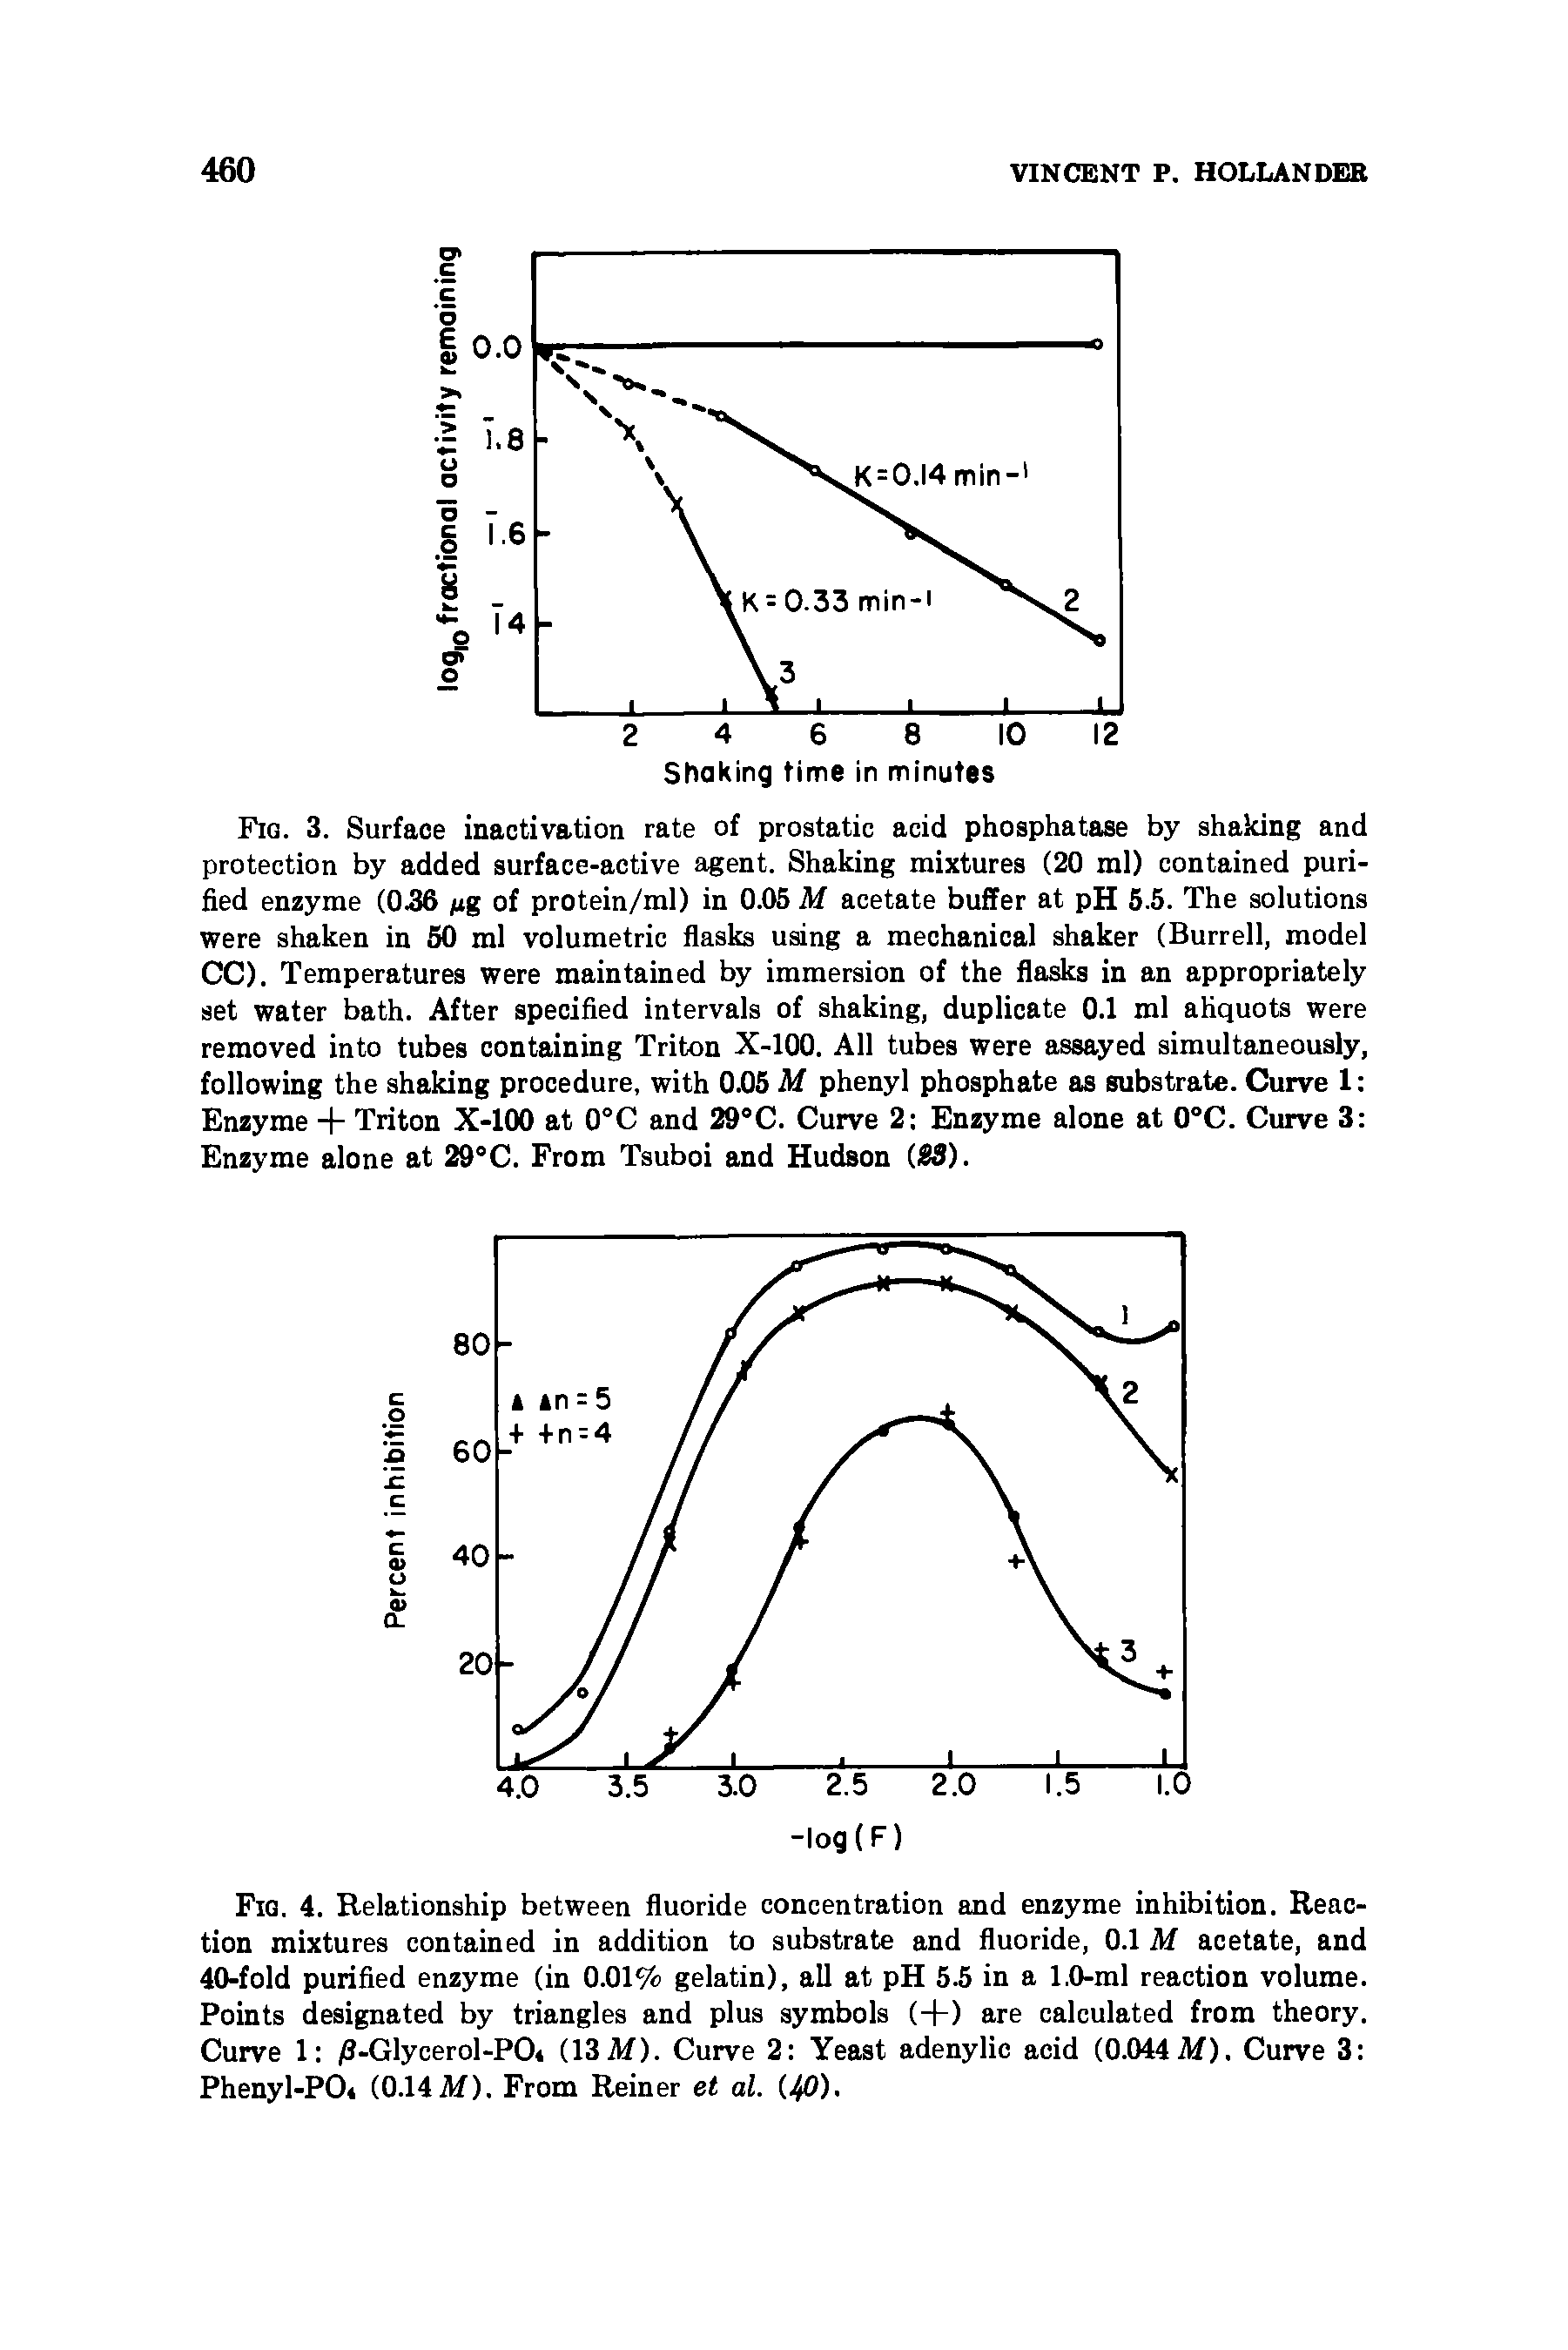 Fig. 3. Surface inactivation rate of prostatic acid phosphatase by shaking and protection by added surface-active agent. Shaking mixtures (20 ml) contained purified enzyme (056 /ug of protein/ml) in 0.05 M acetate buffer at pH 5.5. The solutions were shaken in 50 ml volumetric flasks using a mechanical shaker (Burrell, model CC). Temperatures were maintained by immersion of the flasks in an appropriately set water bath. After specified intervals of shaking, duplicate 0.1 ml ahquots were removed into tubes containing Triton X-100. All tubes were assayed simultaneously, following the shaking procedure, with 0.05 M phenyl phosphate as substrate. Curve 1 Enzyme + Triton X-100 at 0°C and 29°C. Curve 2 Enzyme alone at 0°C. Curve 3 Enzyme alone at 29°C. From Tsuboi and Hudson (88).